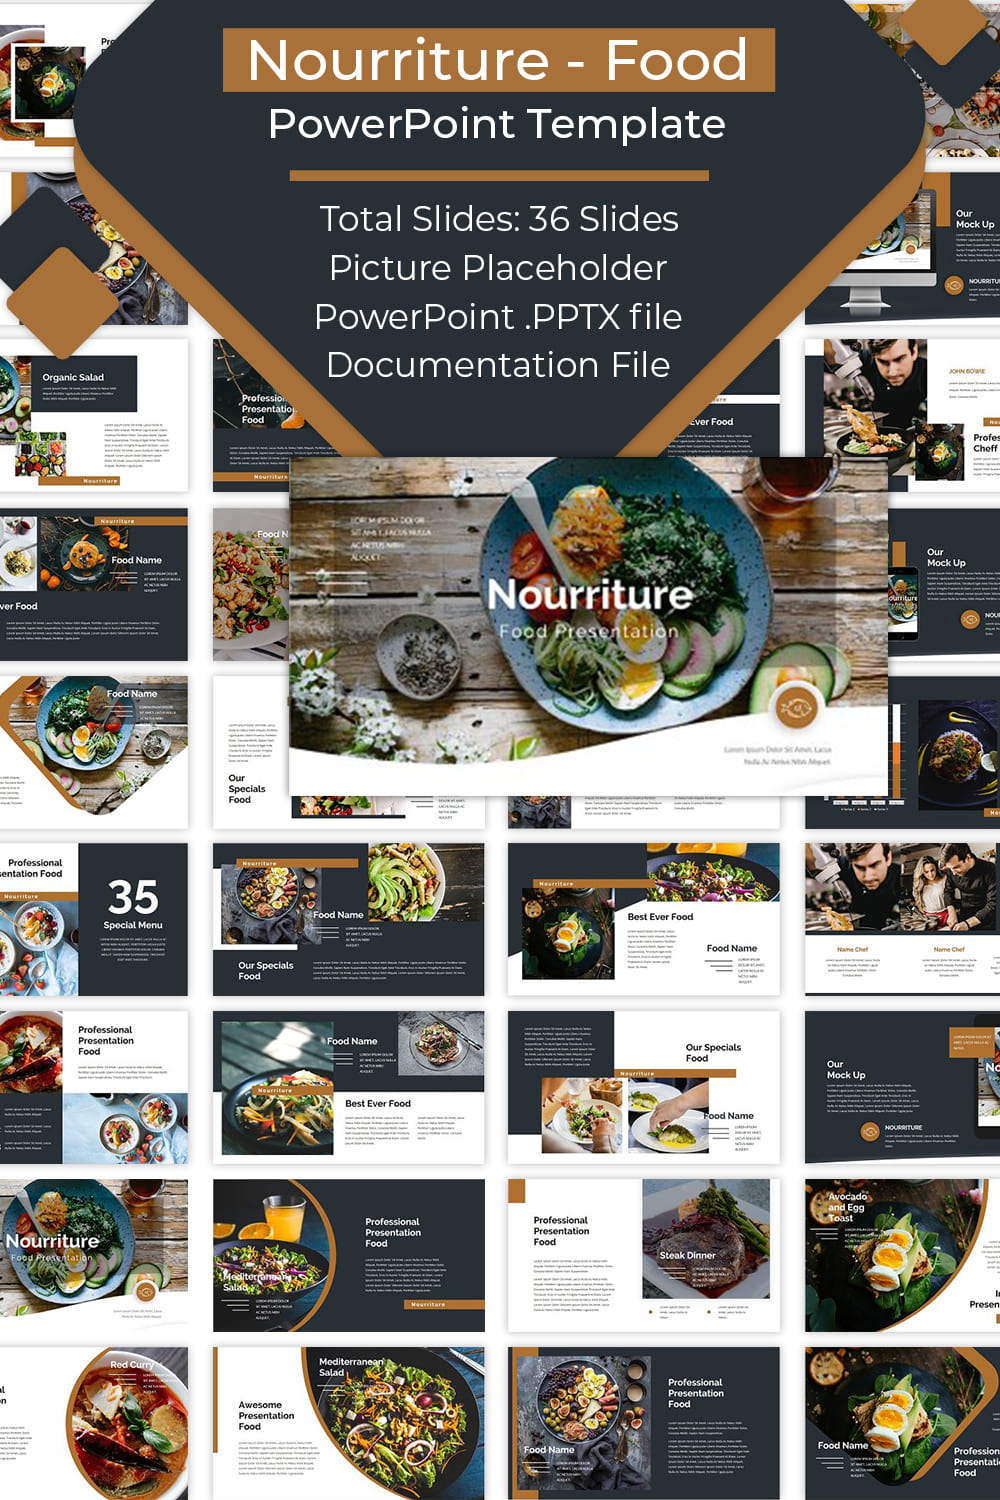 Nourriture - Food Powerpoint - preview of Pinterest image.